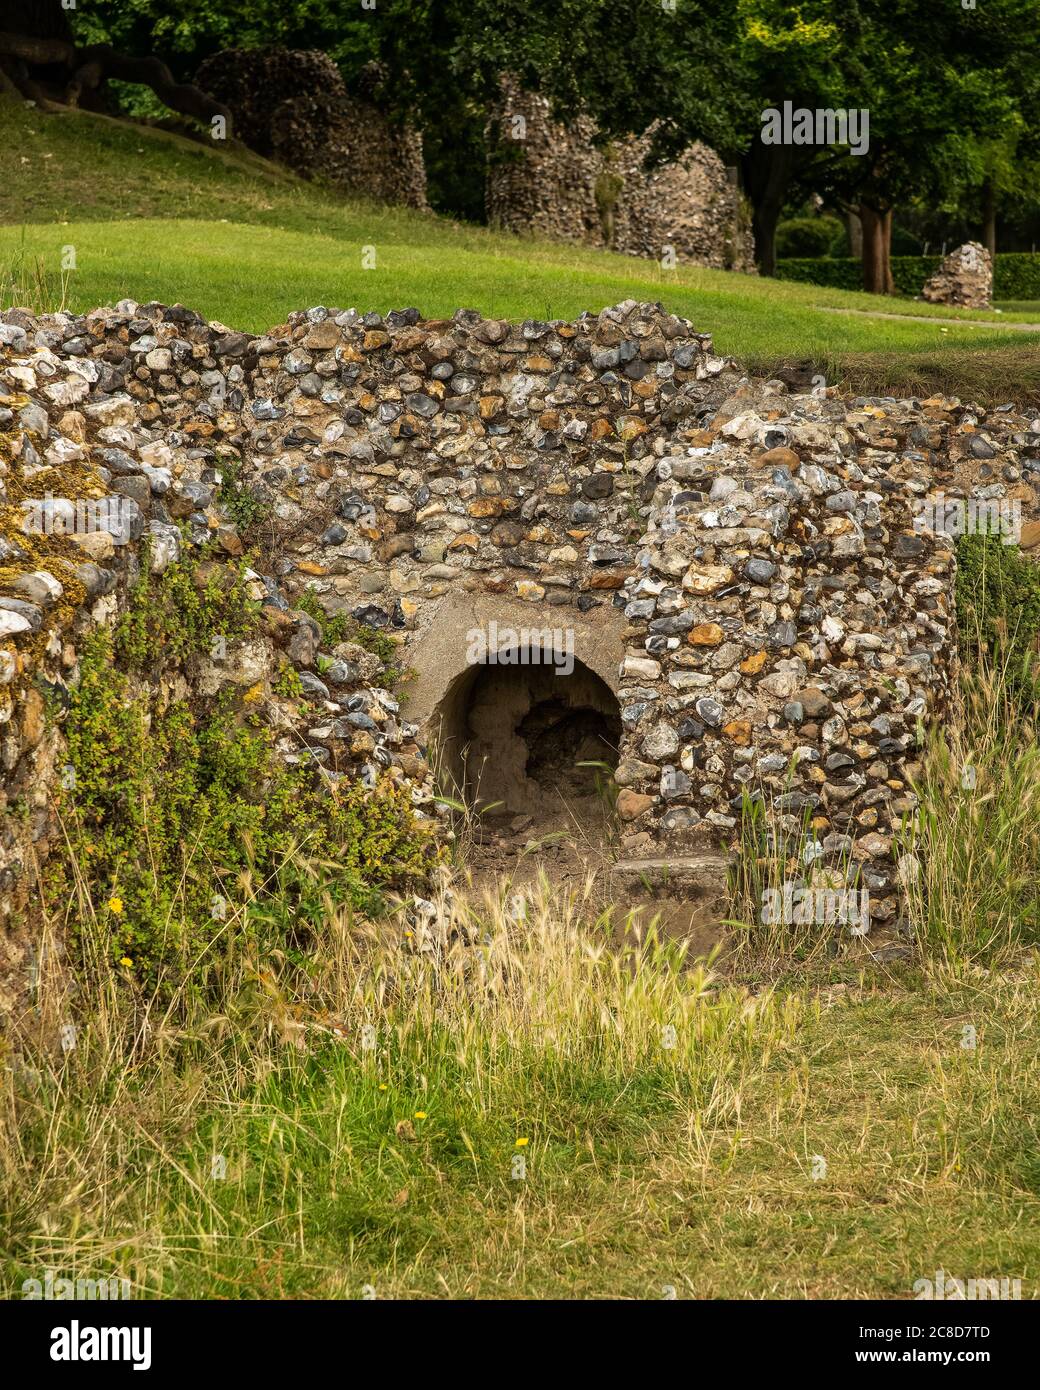 Tiny archway discovered in a flint stone ruined wall Stock Photo